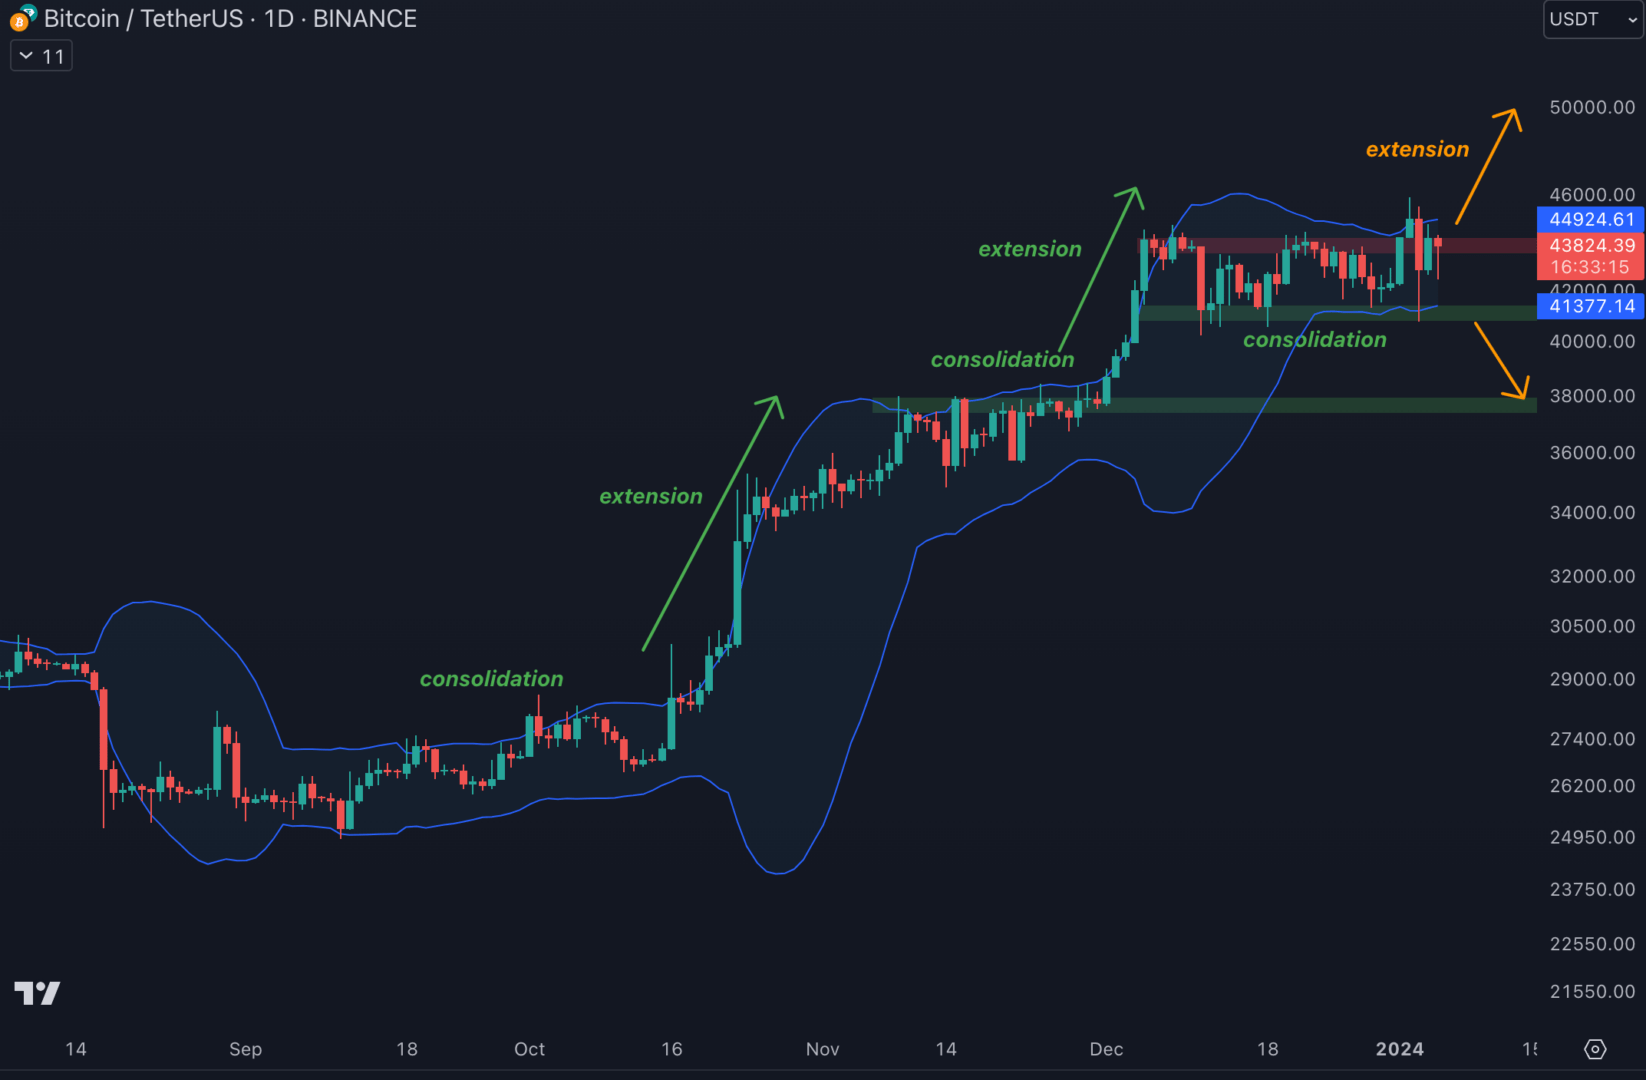 The Bollinger bands are currently tightening on Bitcoin on a daily basis.  The price is in the consolidation phase.  - January 5, 2024.